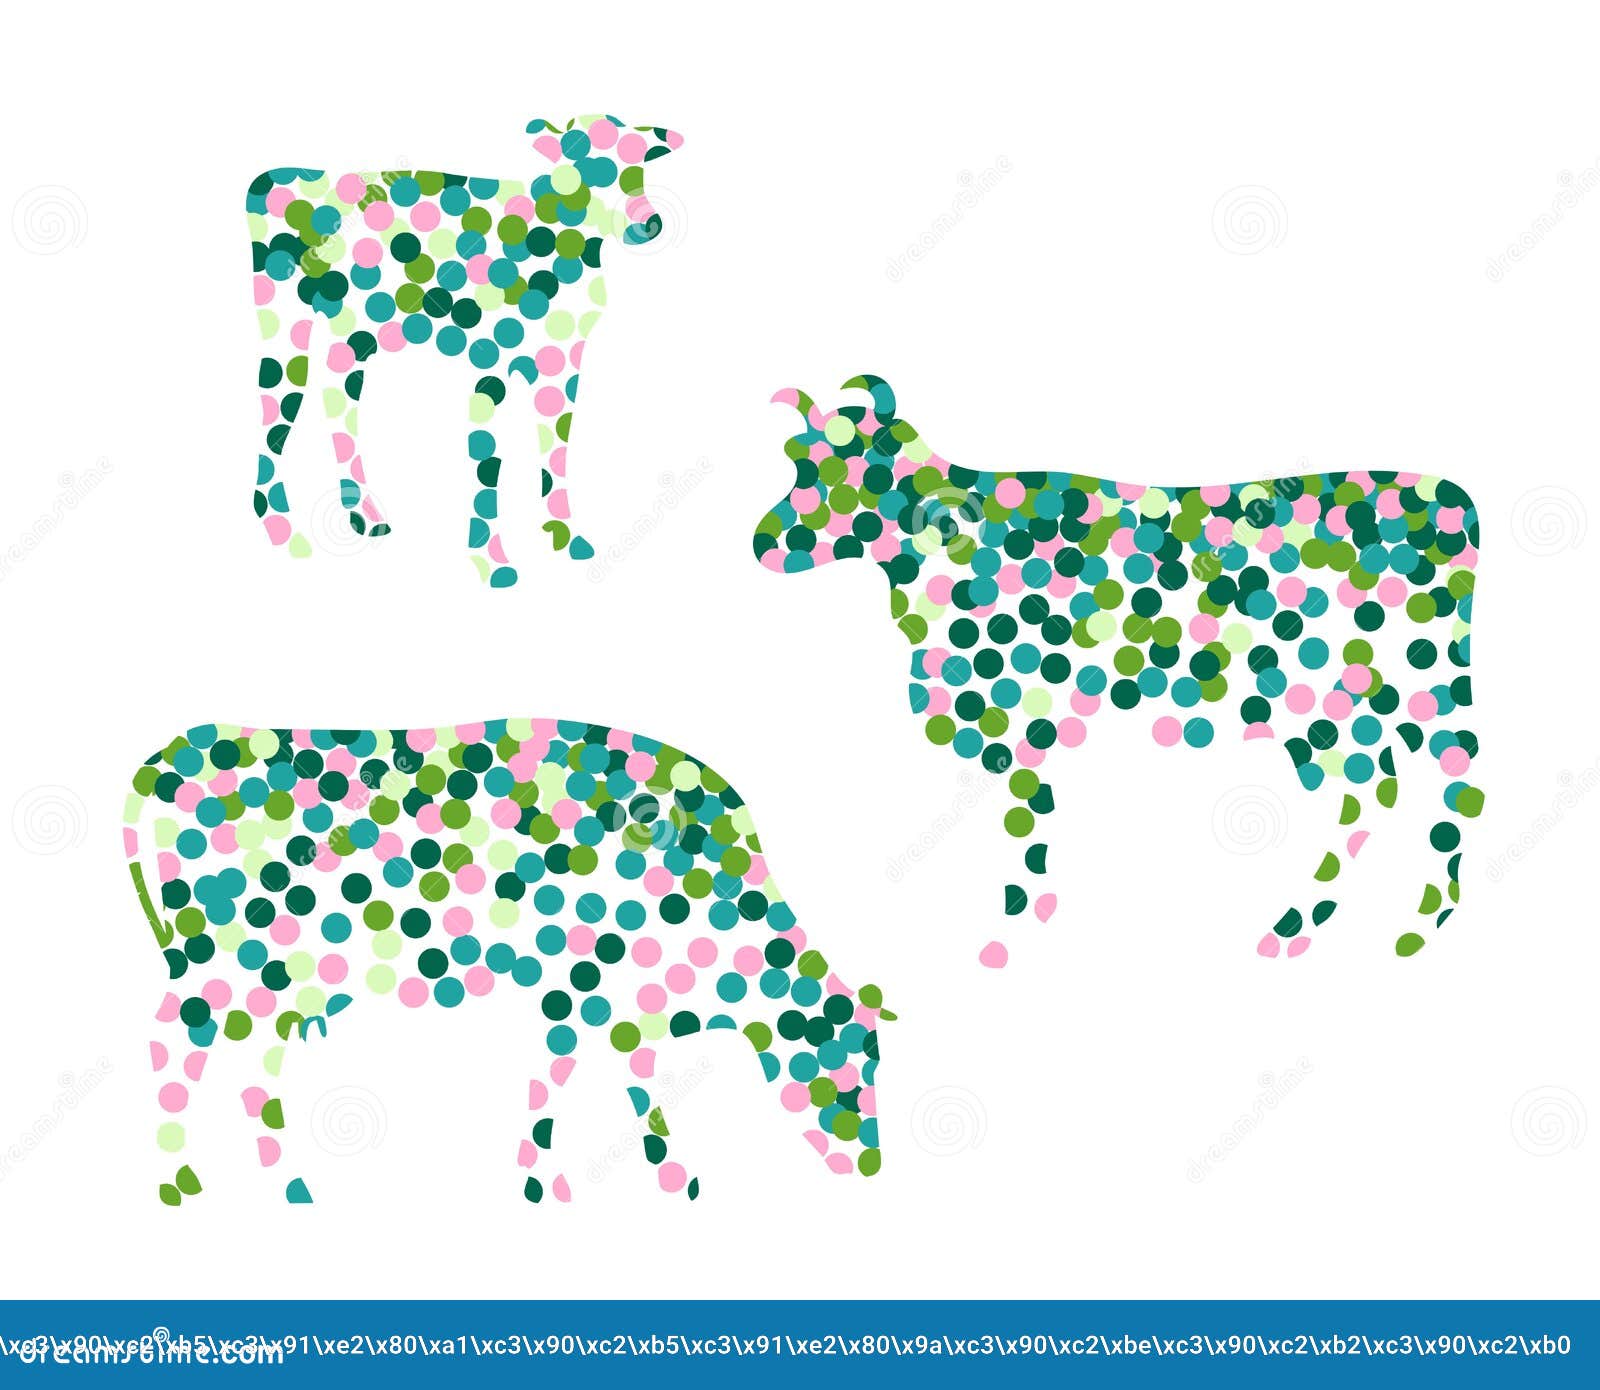 Silhouettes of Cows Made Up of Circles. Mosaic Image Stock Vector -  Illustration of pointillism, isolated: 163870280